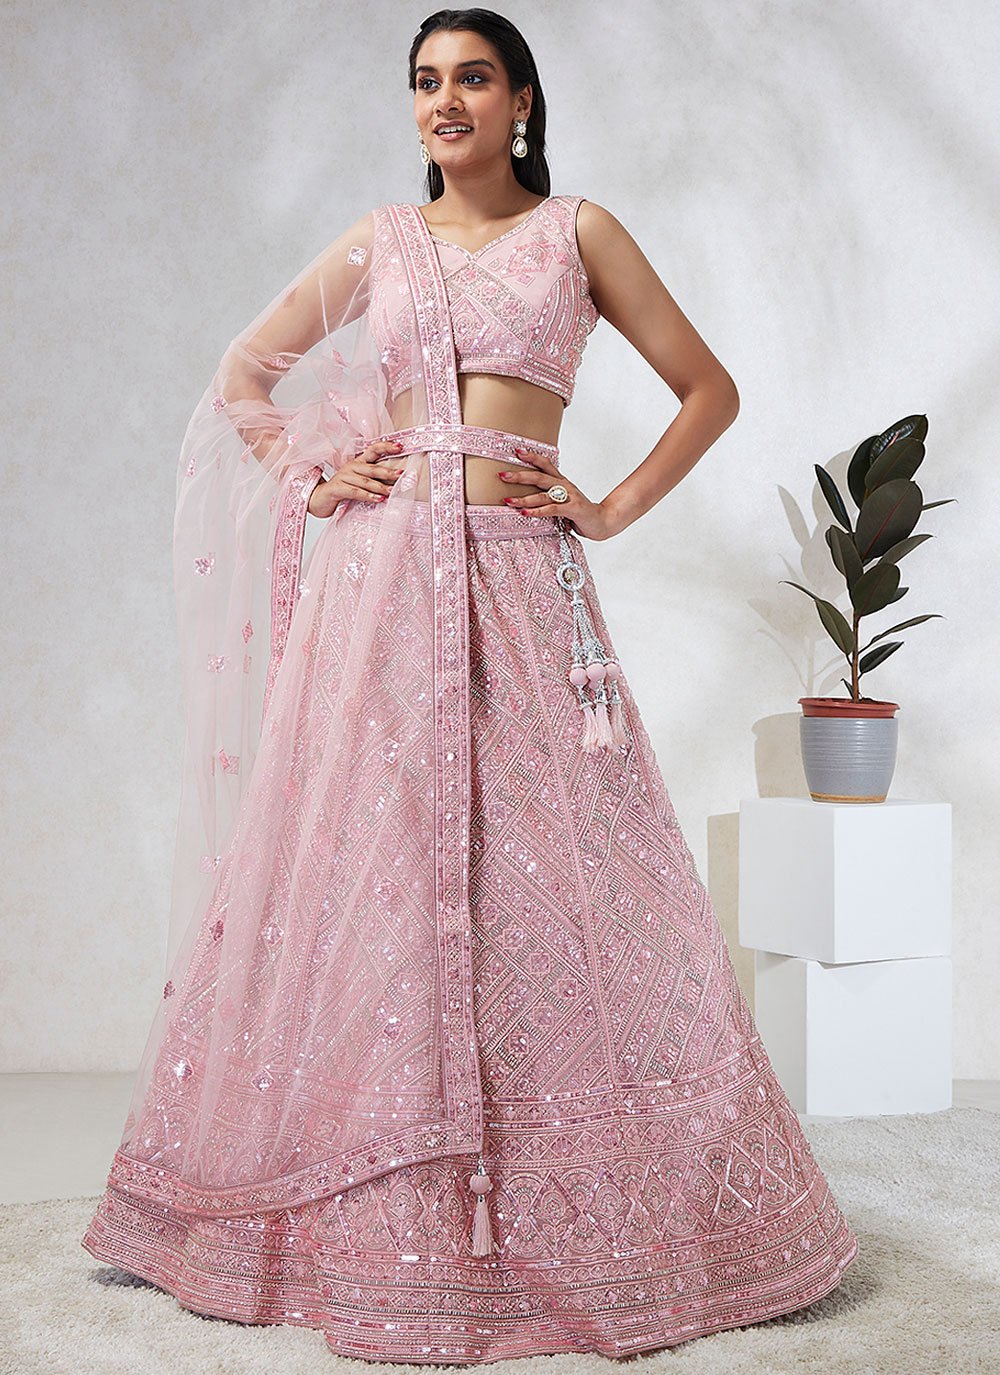 Blush Pink Net Lehenga Choli With Exquisite Thread Embroidery and Sequins Detailing